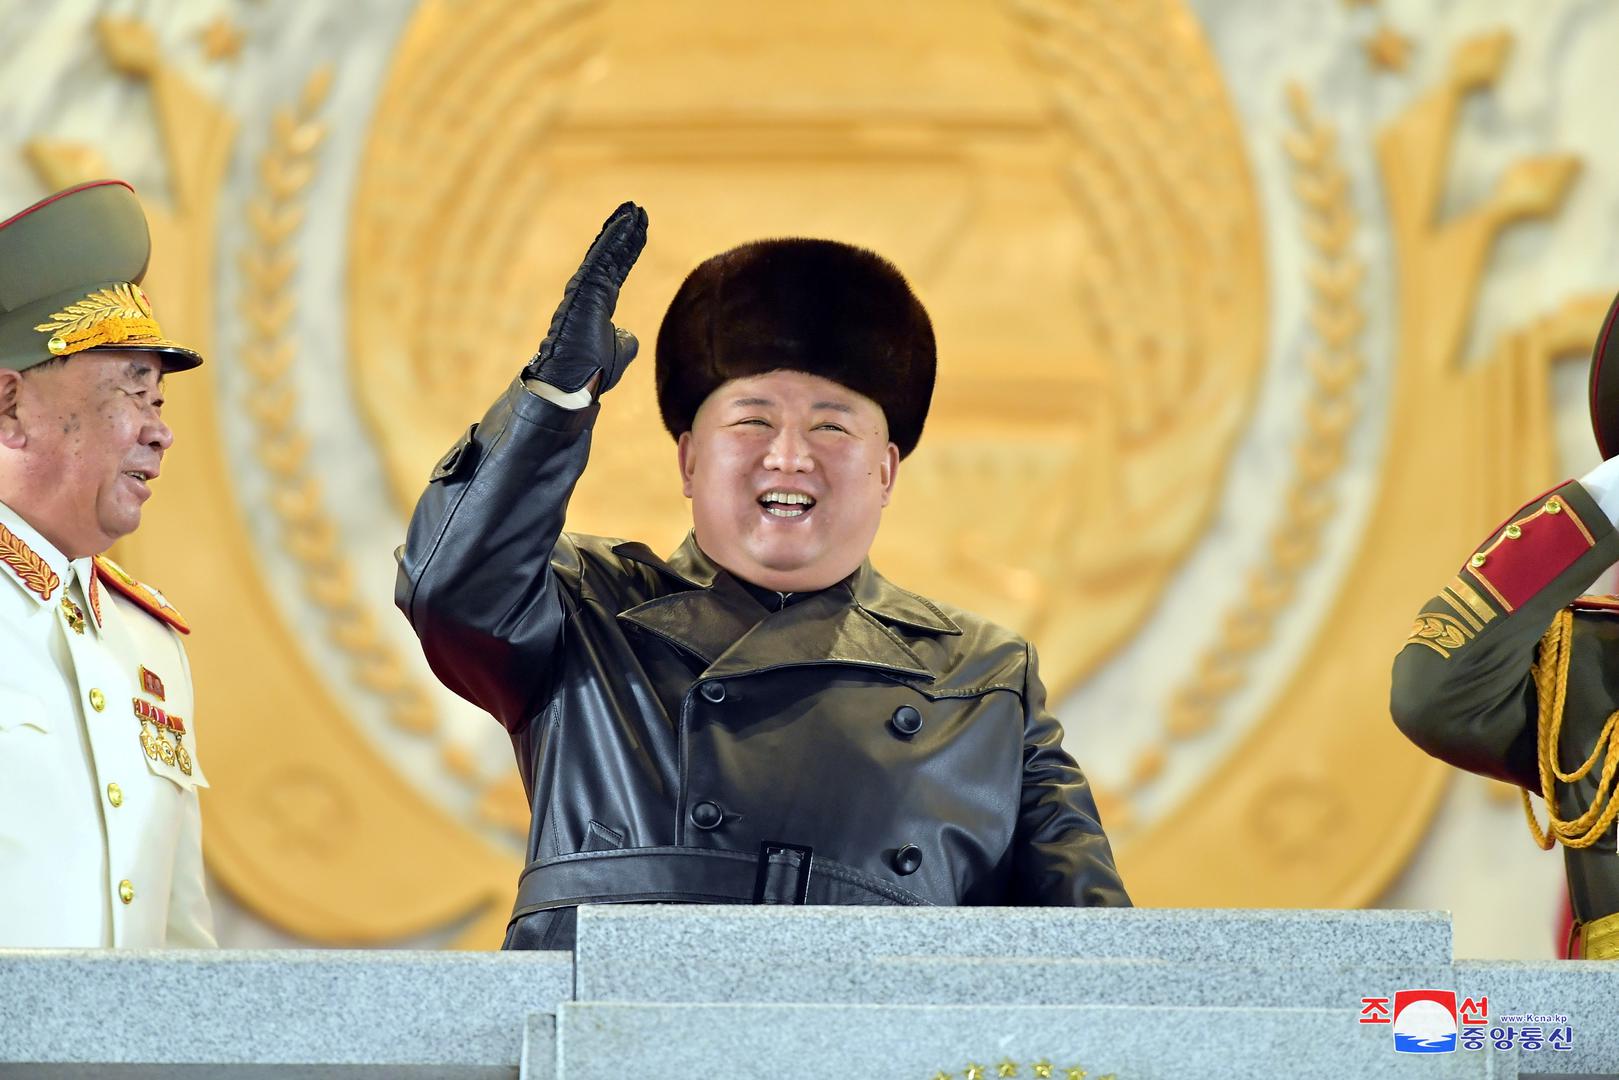 8th Congress of the Workers' Party in Pyongyang North Korean leader Kim Jong Un waves during a ceremony for the 8th Congress of the Workers' Party in Pyongyang, North Korea January 14, 2021 in this photo supplied by North Korea's Central News Agency (KCNA).    KCNA via REUTERS    ATTENTION EDITORS - THIS IMAGE WAS PROVIDED BY A THIRD PARTY. REUTERS IS UNABLE TO INDEPENDENTLY VERIFY THIS IMAGE. NO THIRD PARTY SALES. SOUTH KOREA OUT. NO COMMERCIAL OR EDITORIAL SALES IN SOUTH KOREA.     TPX IMAGES OF THE DAY KCNA